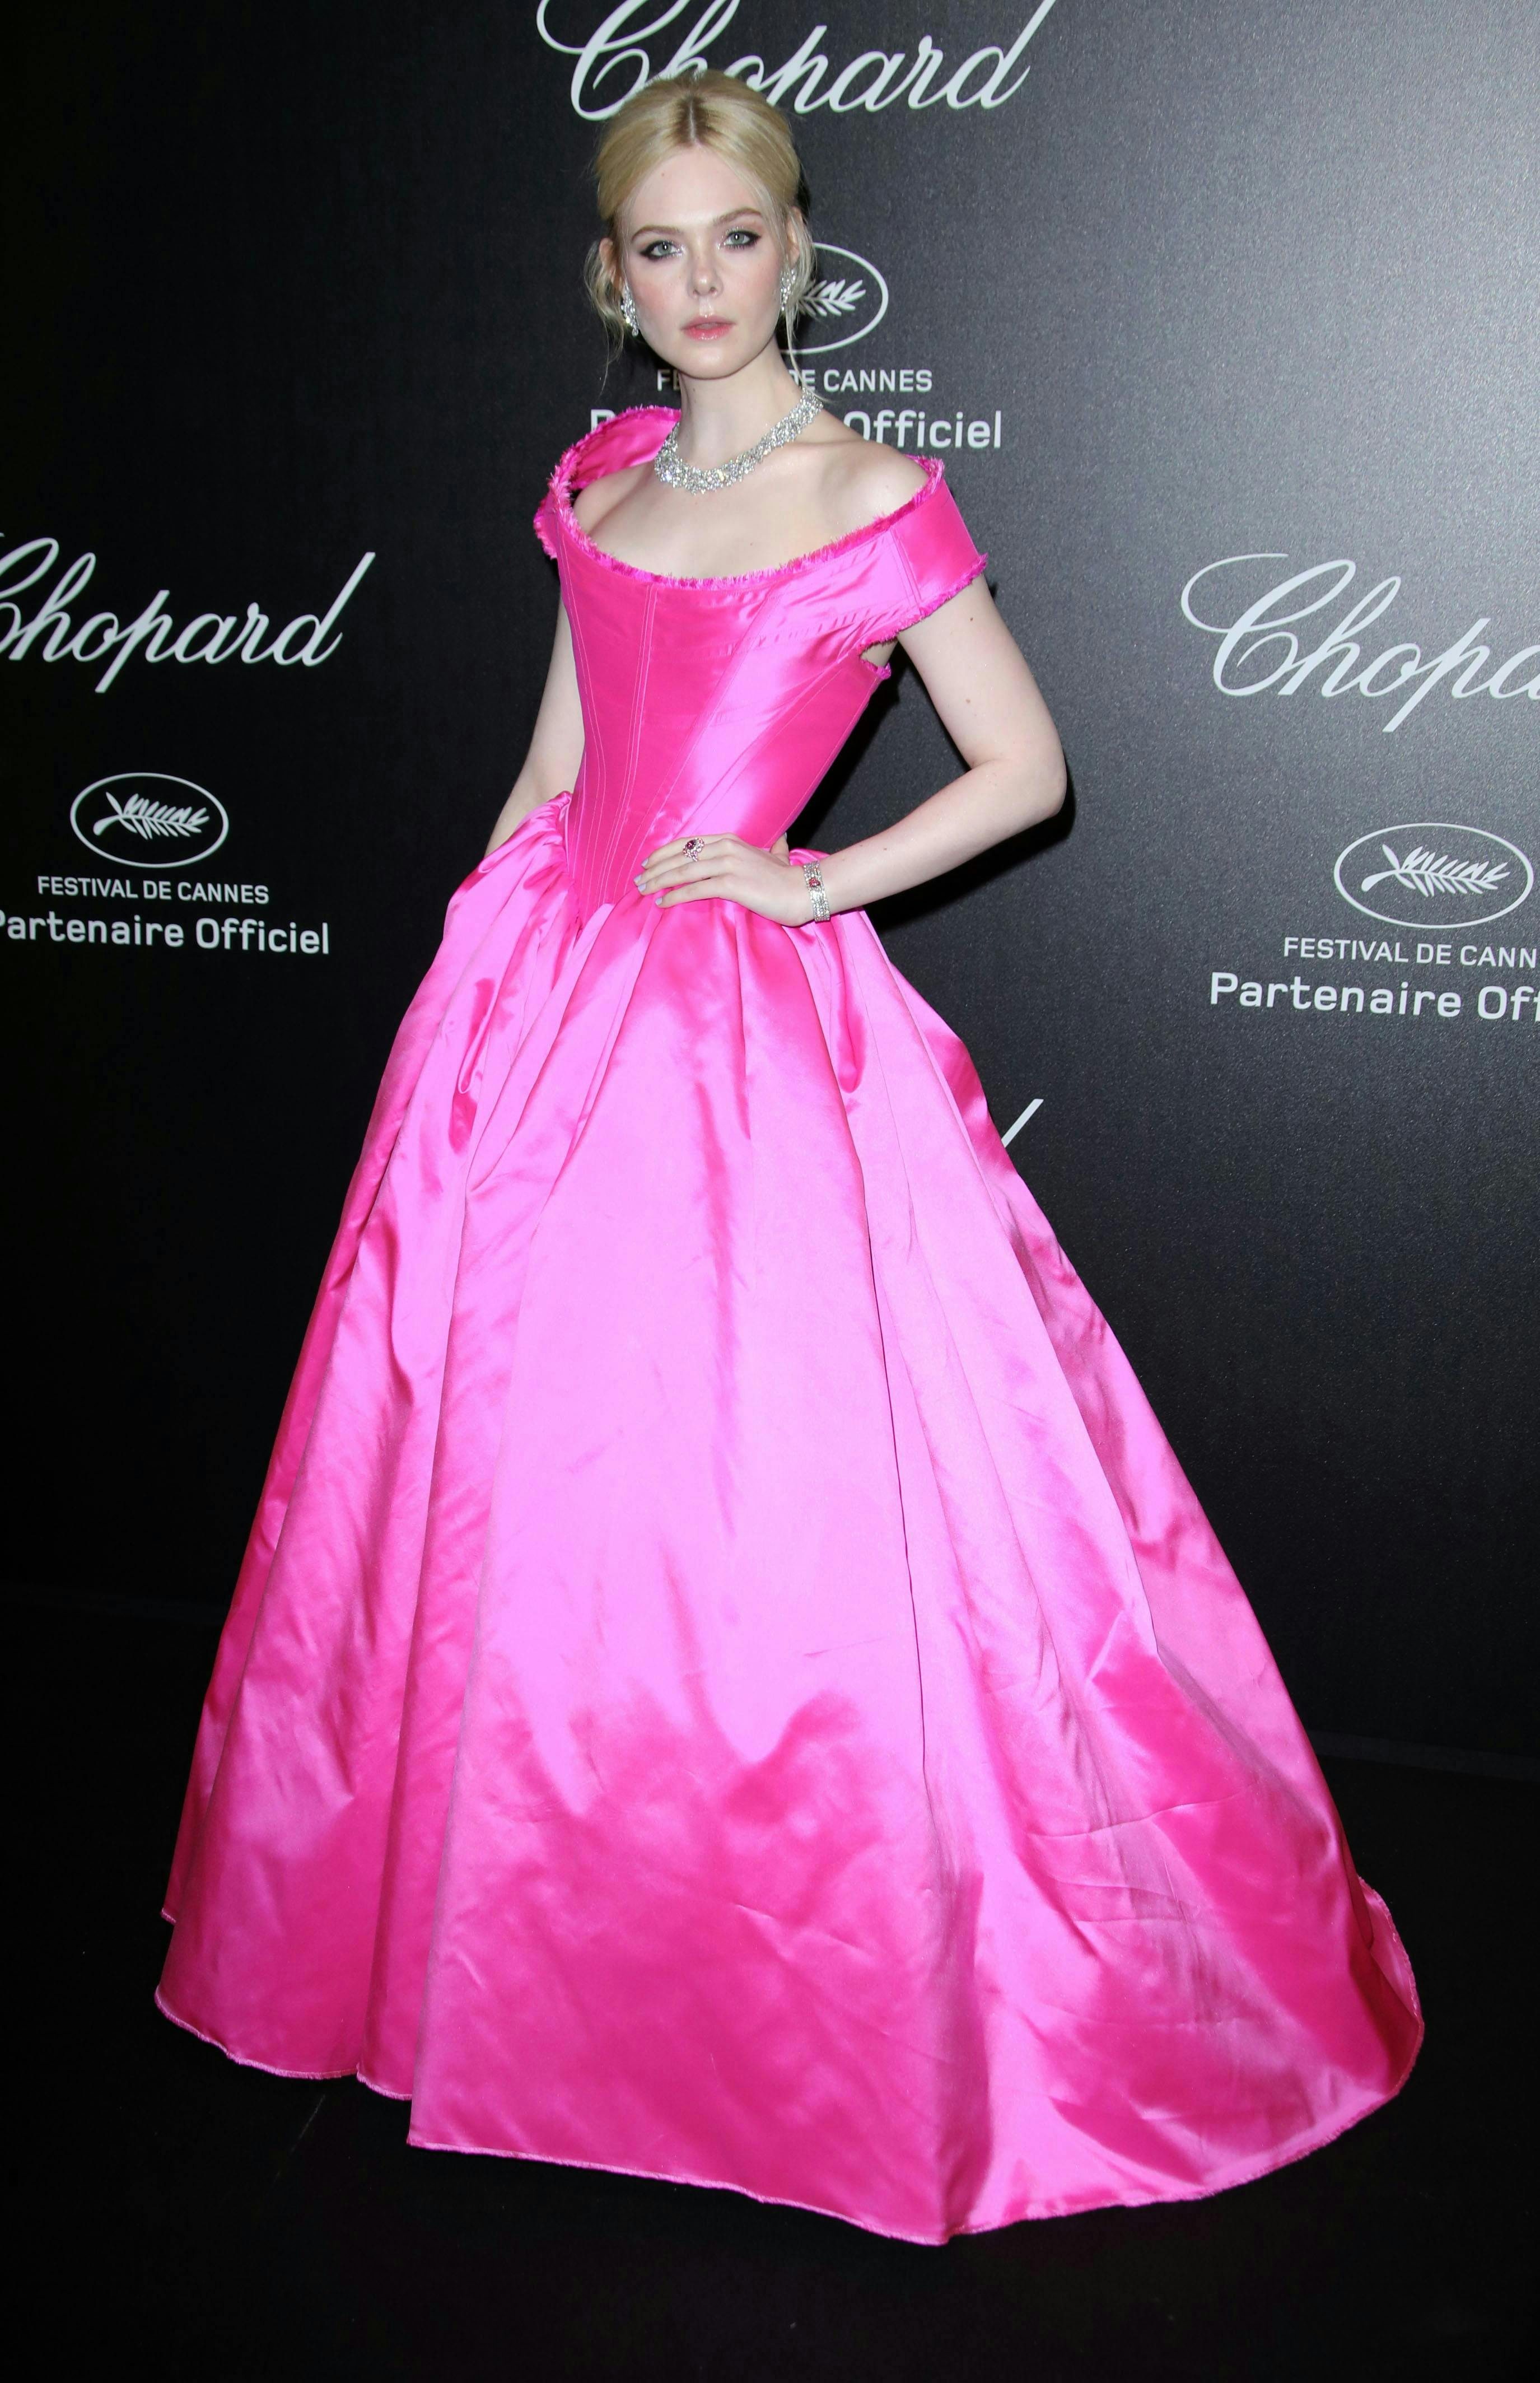 chopard party 72nd cannes film festival france 17 may 2019 elle fanning wearing vivienne westwood neon pink dress fluorescent off shoulder corset bodice full skirt floor long gown fashion actor alone female full length personality 80612015 clothing apparel person human woman